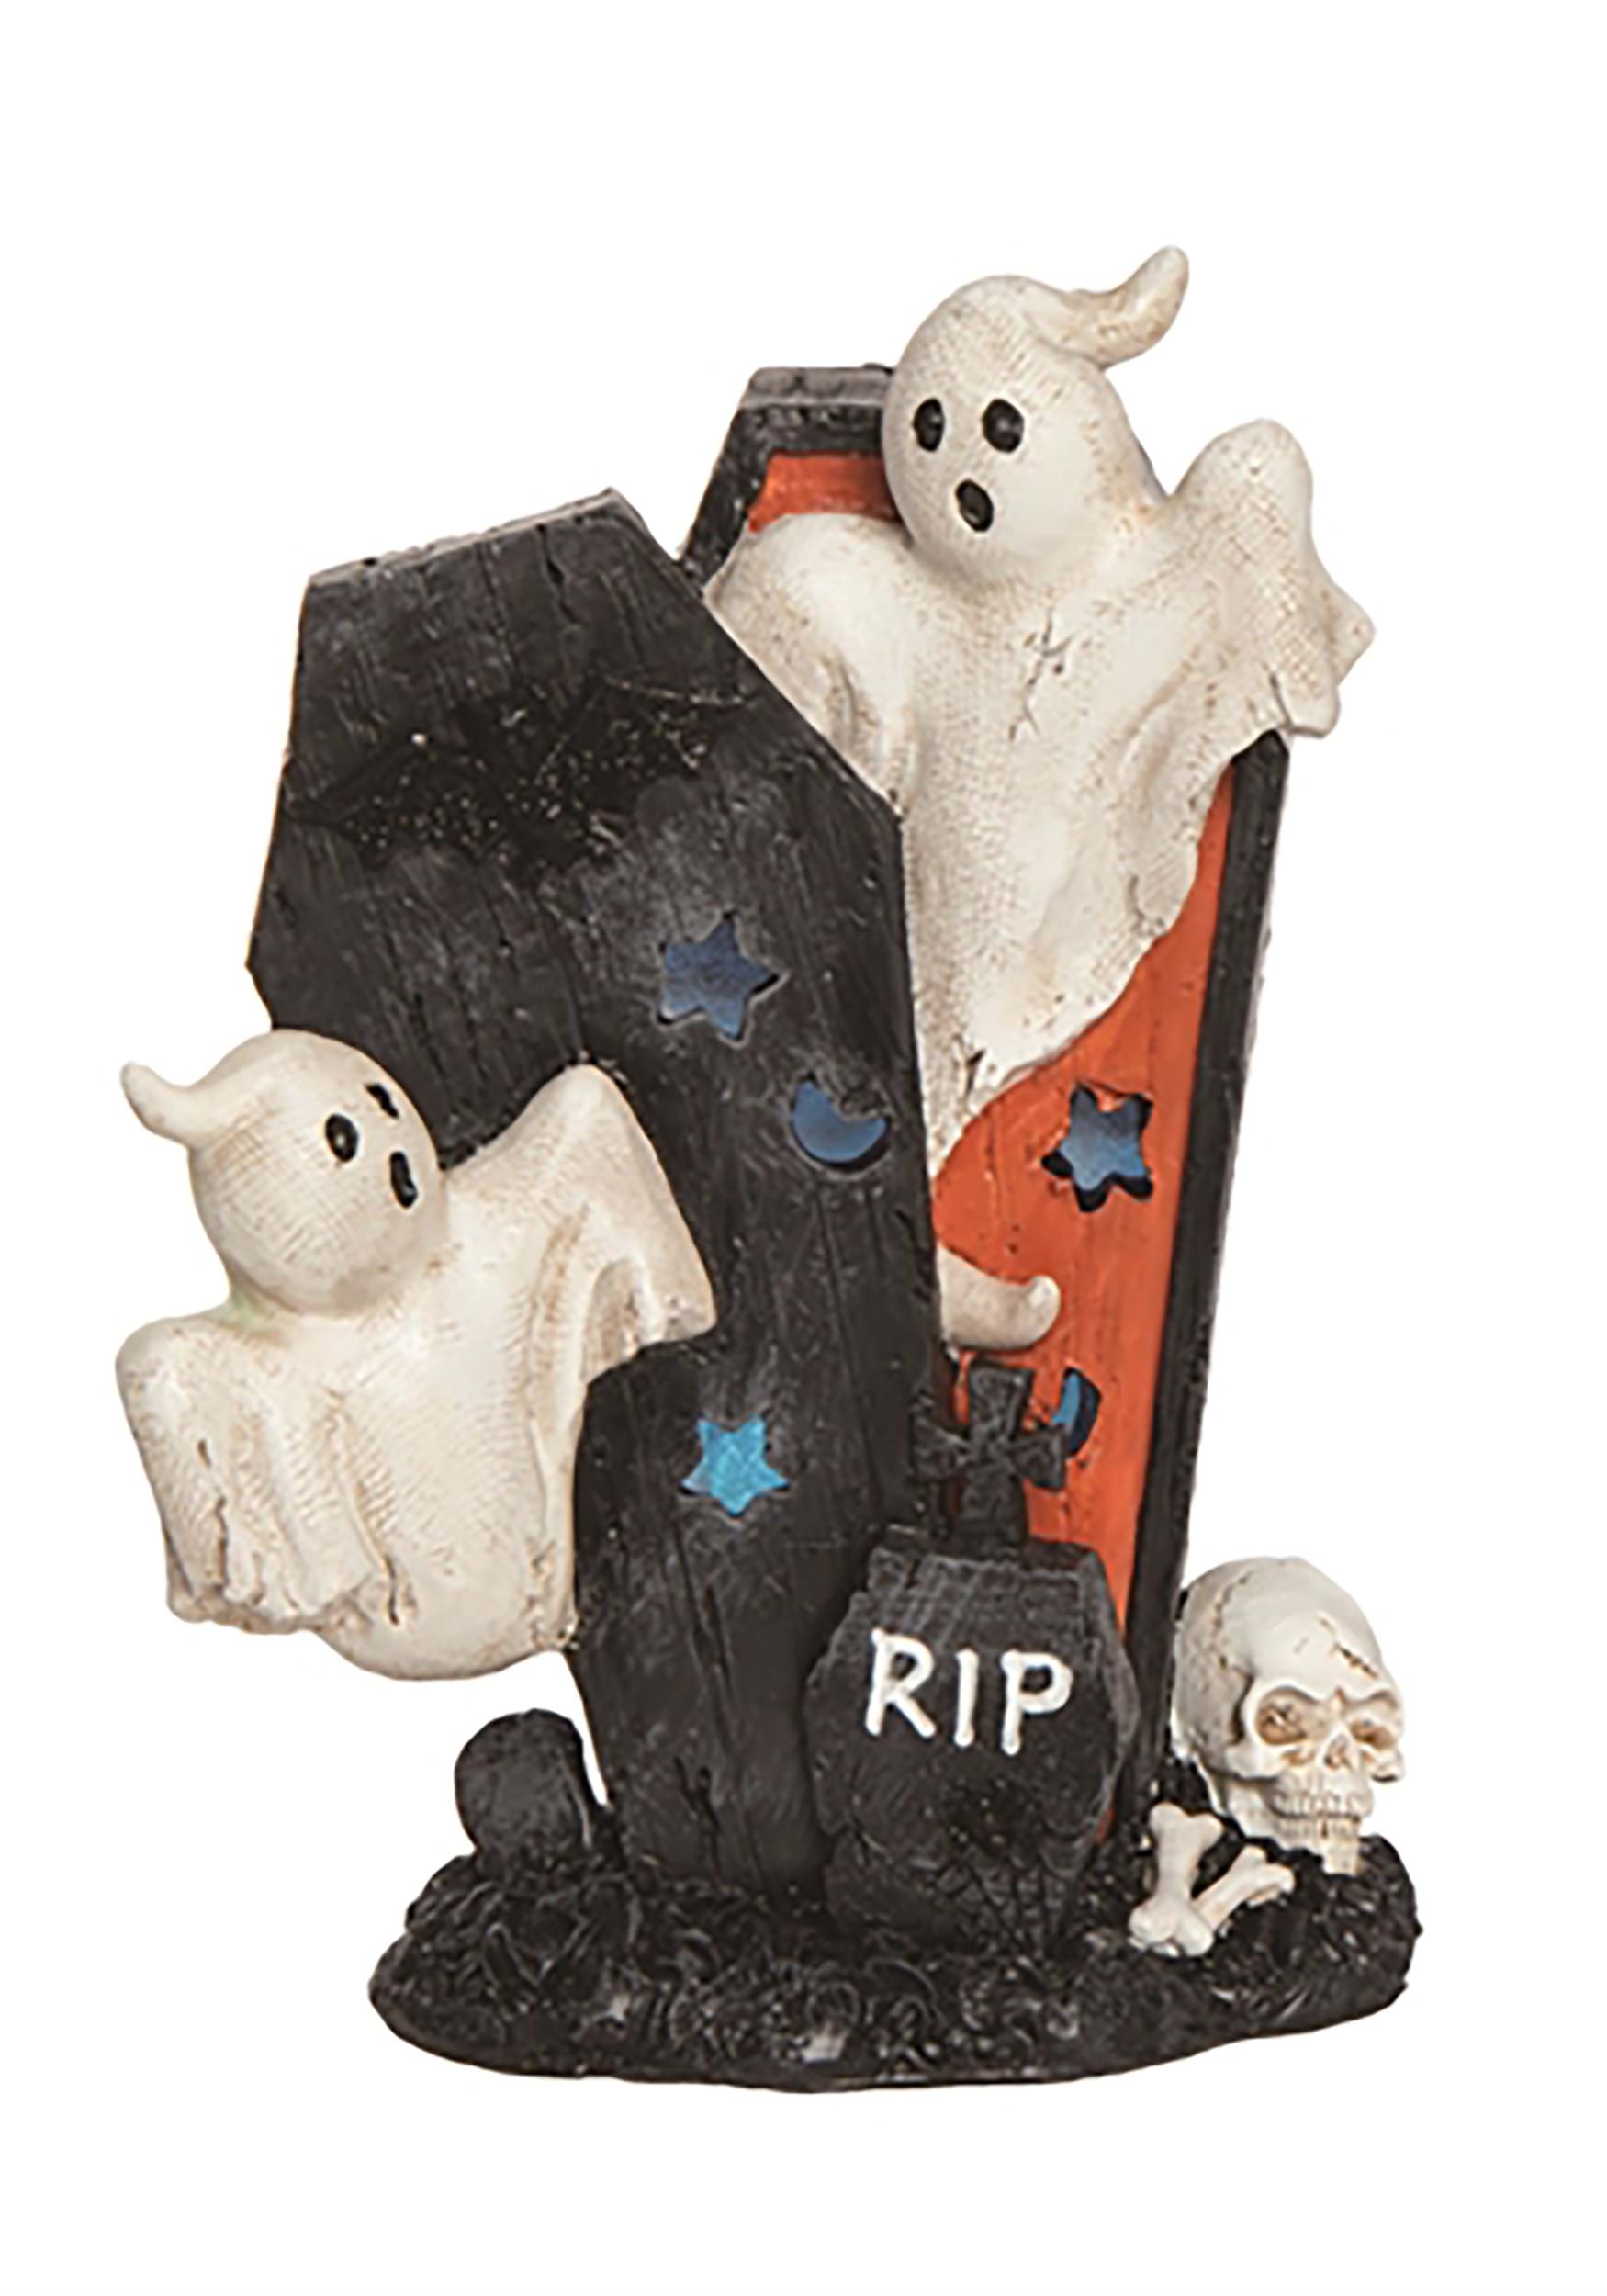 Light Up Ghost in Coffin Decorative Figure